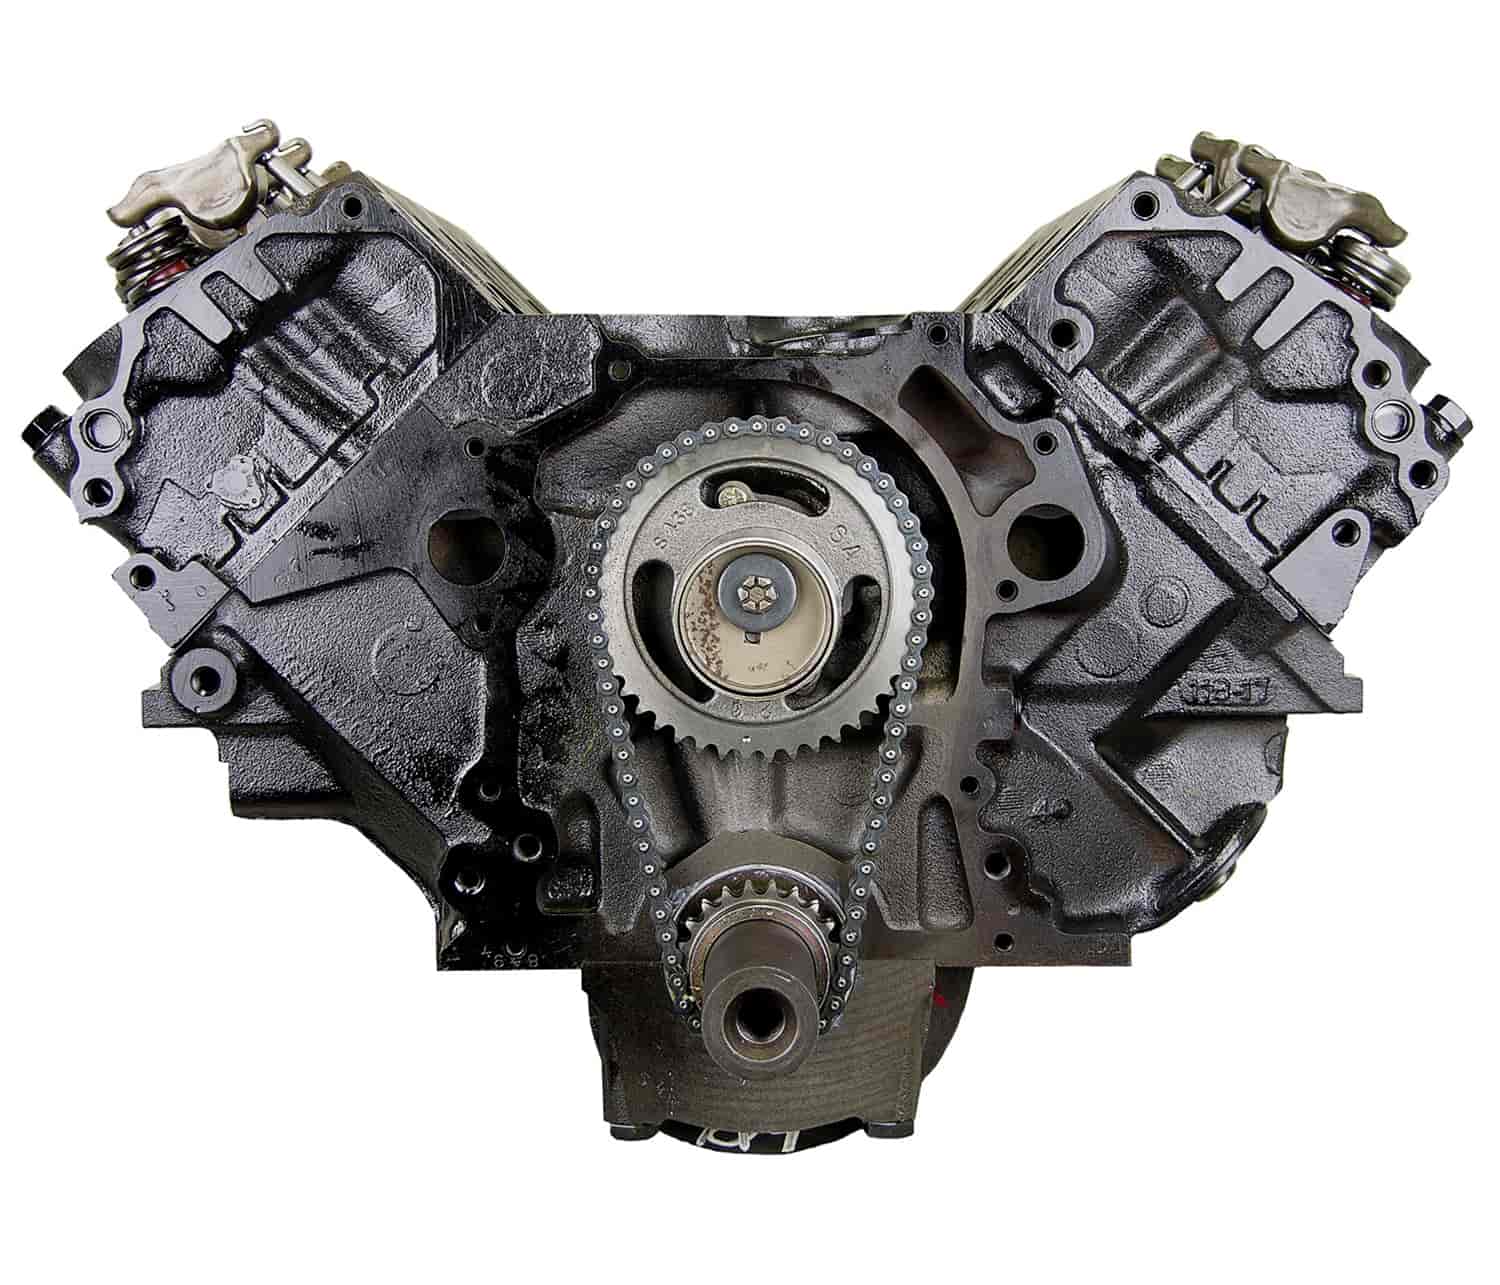 Remanufactured Crate Engine for 1985-1987 Ford Truck with 429ci/7.0L V8